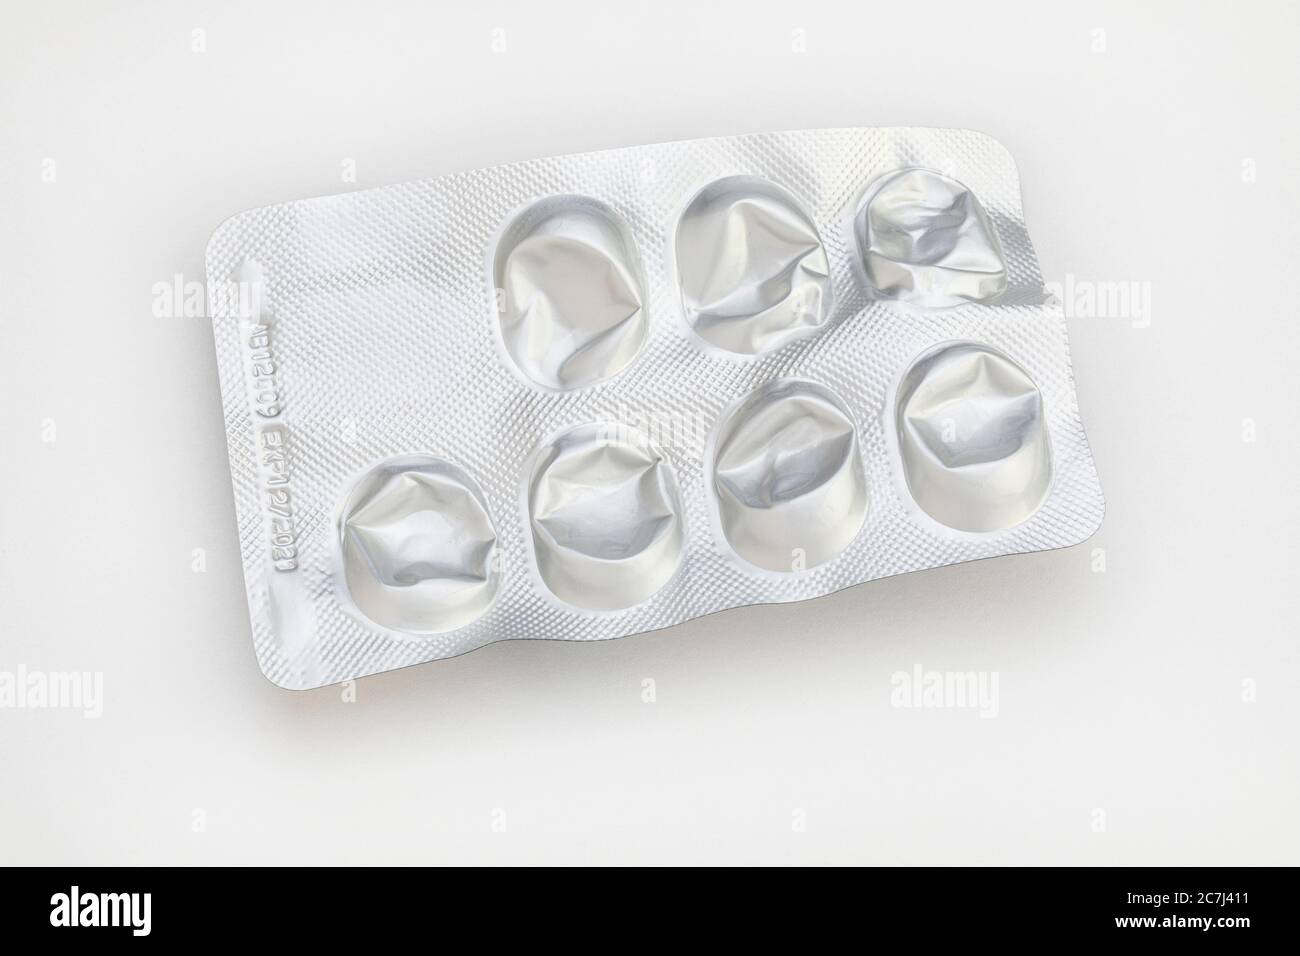 A used, empty tablet blister pack. Stock Photo